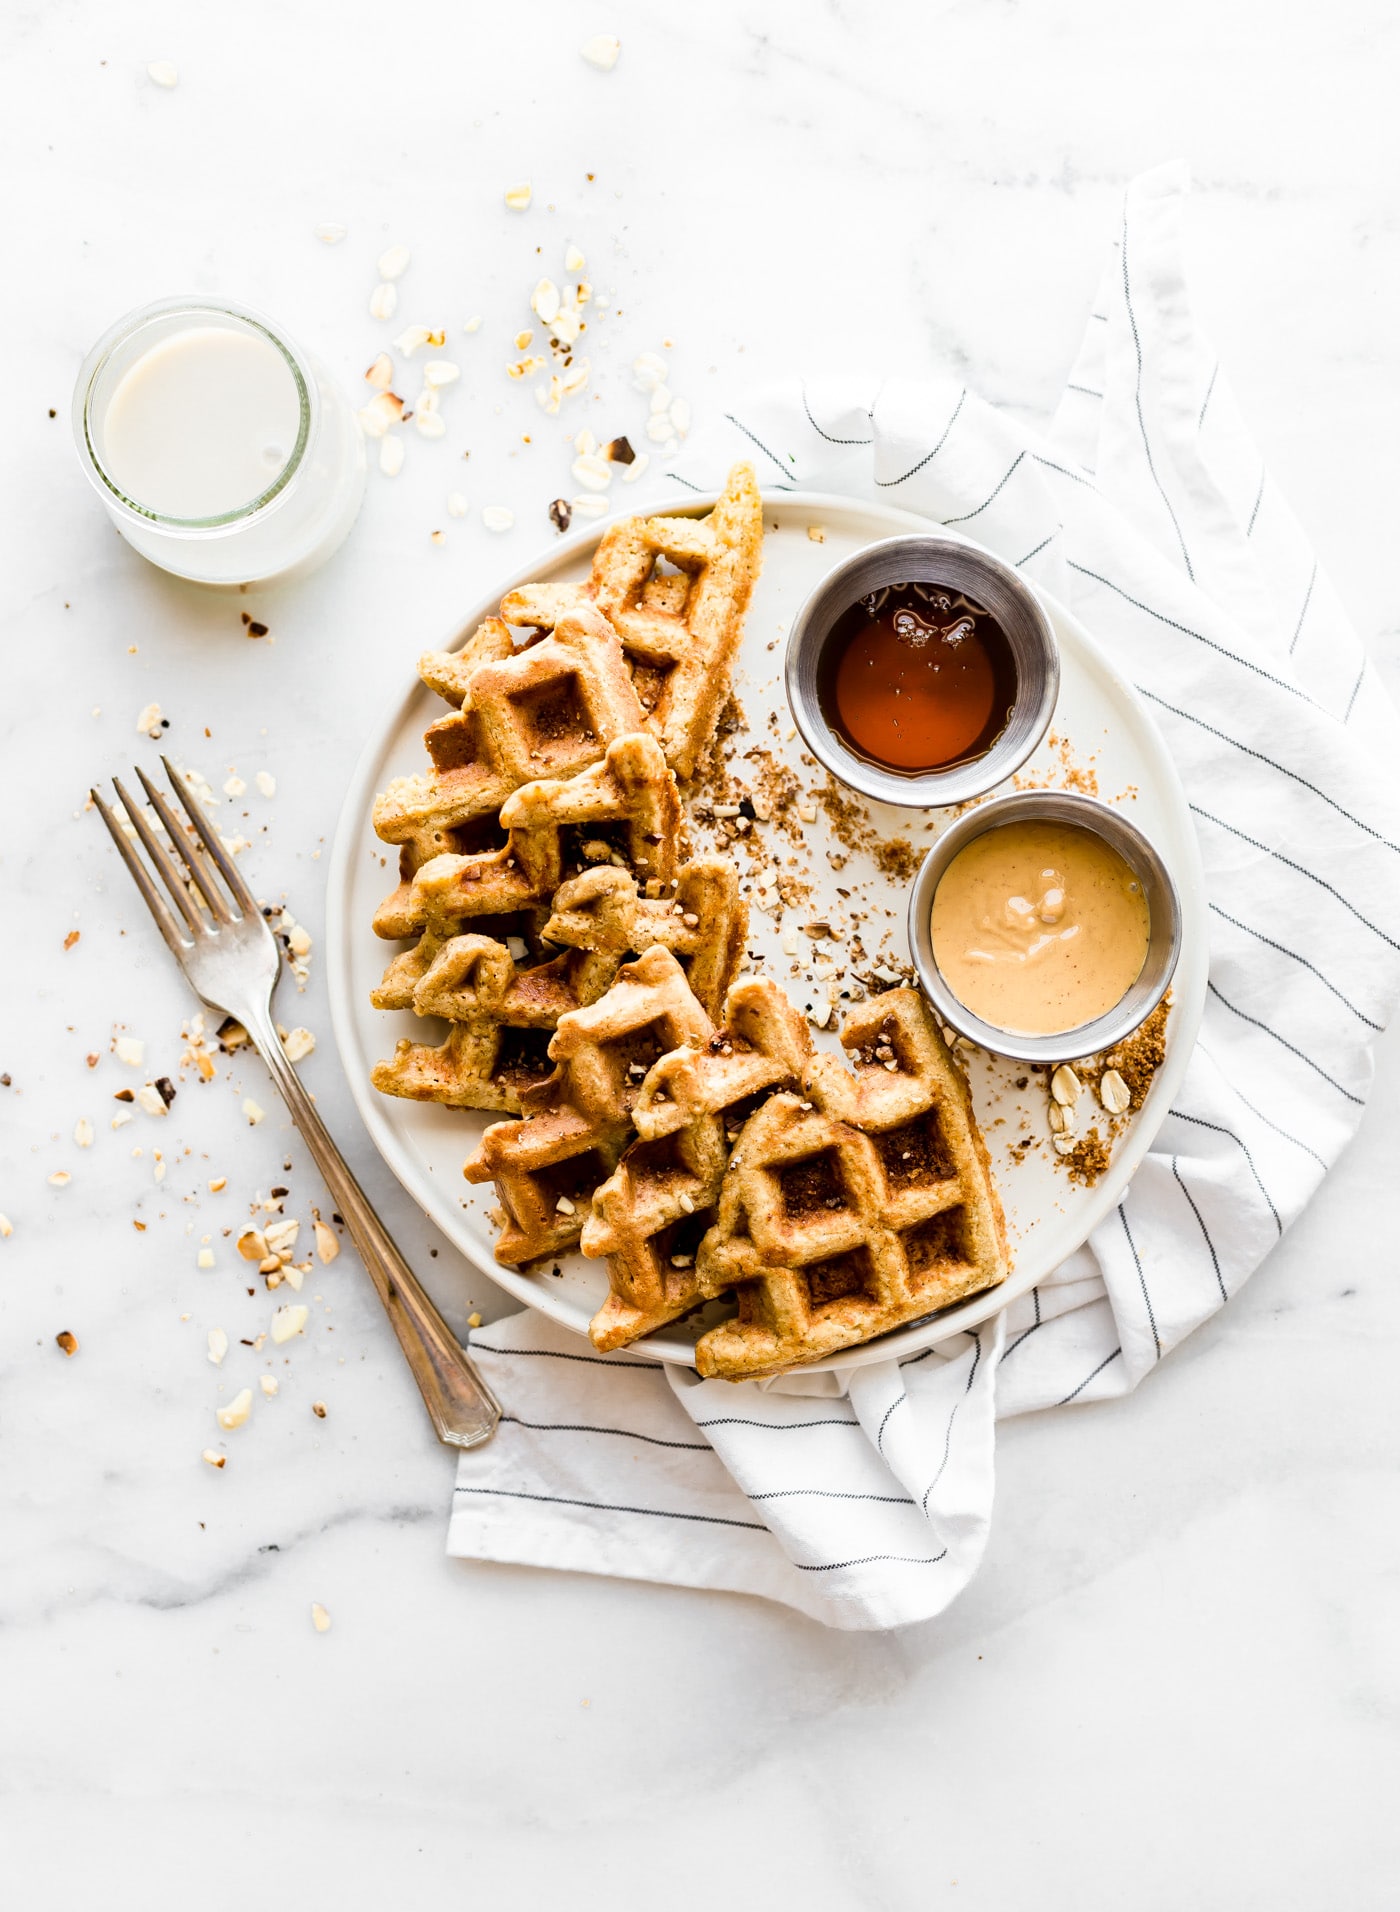 Several flourless peanut butter waffles on white plate with peanut butter on side and maple syrup on side.